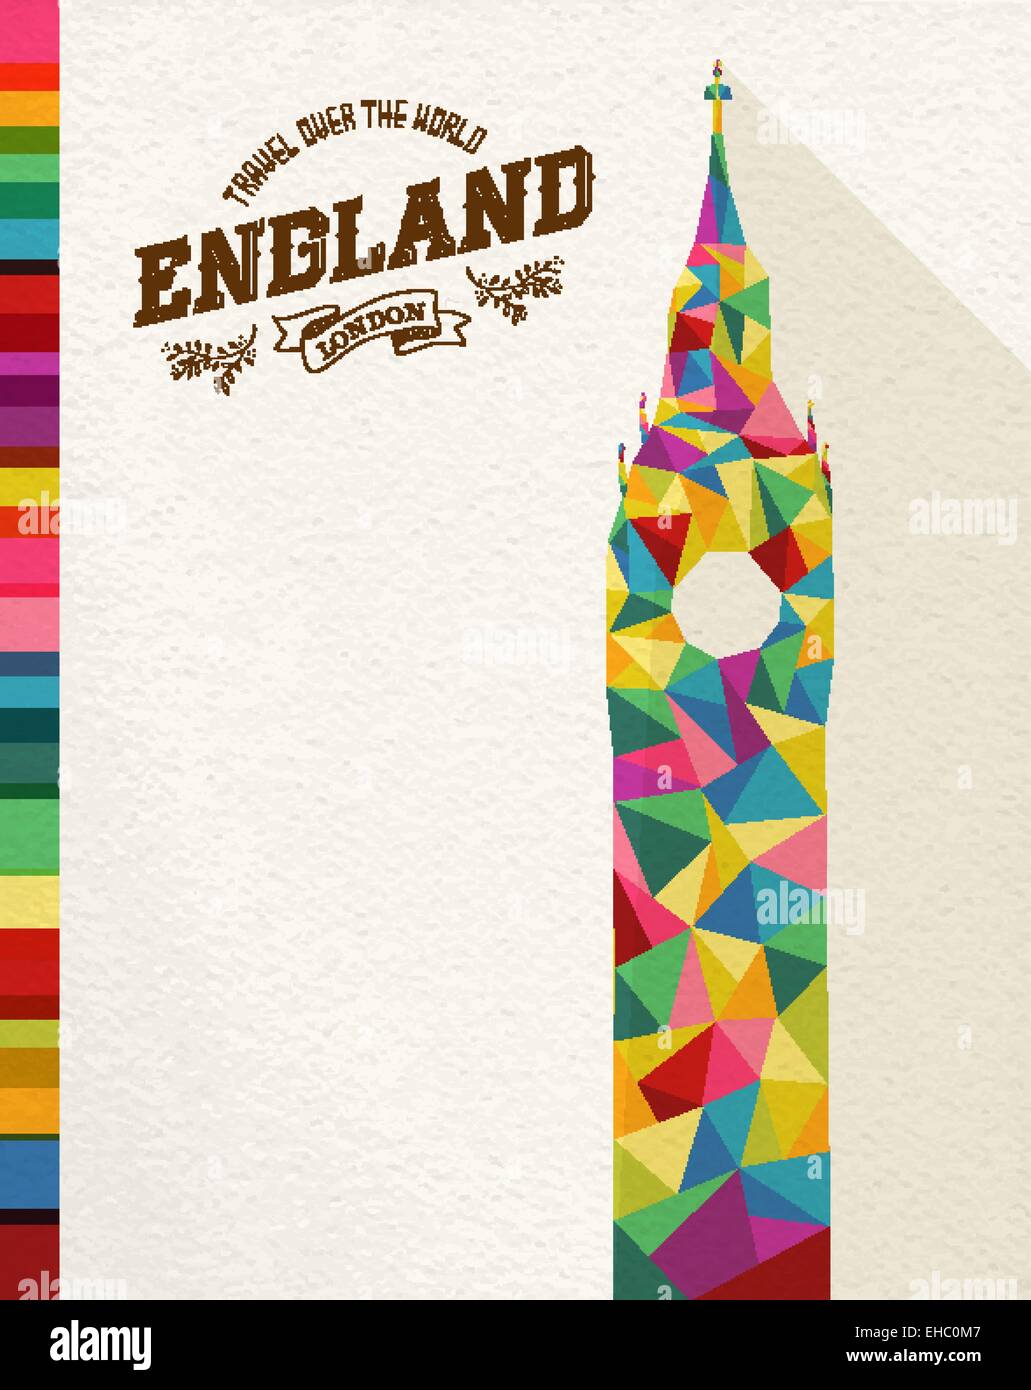 Travel England famous landmark. Colorful polygonal monument with vintage label and textured paper background. Ideal for website Stock Vector